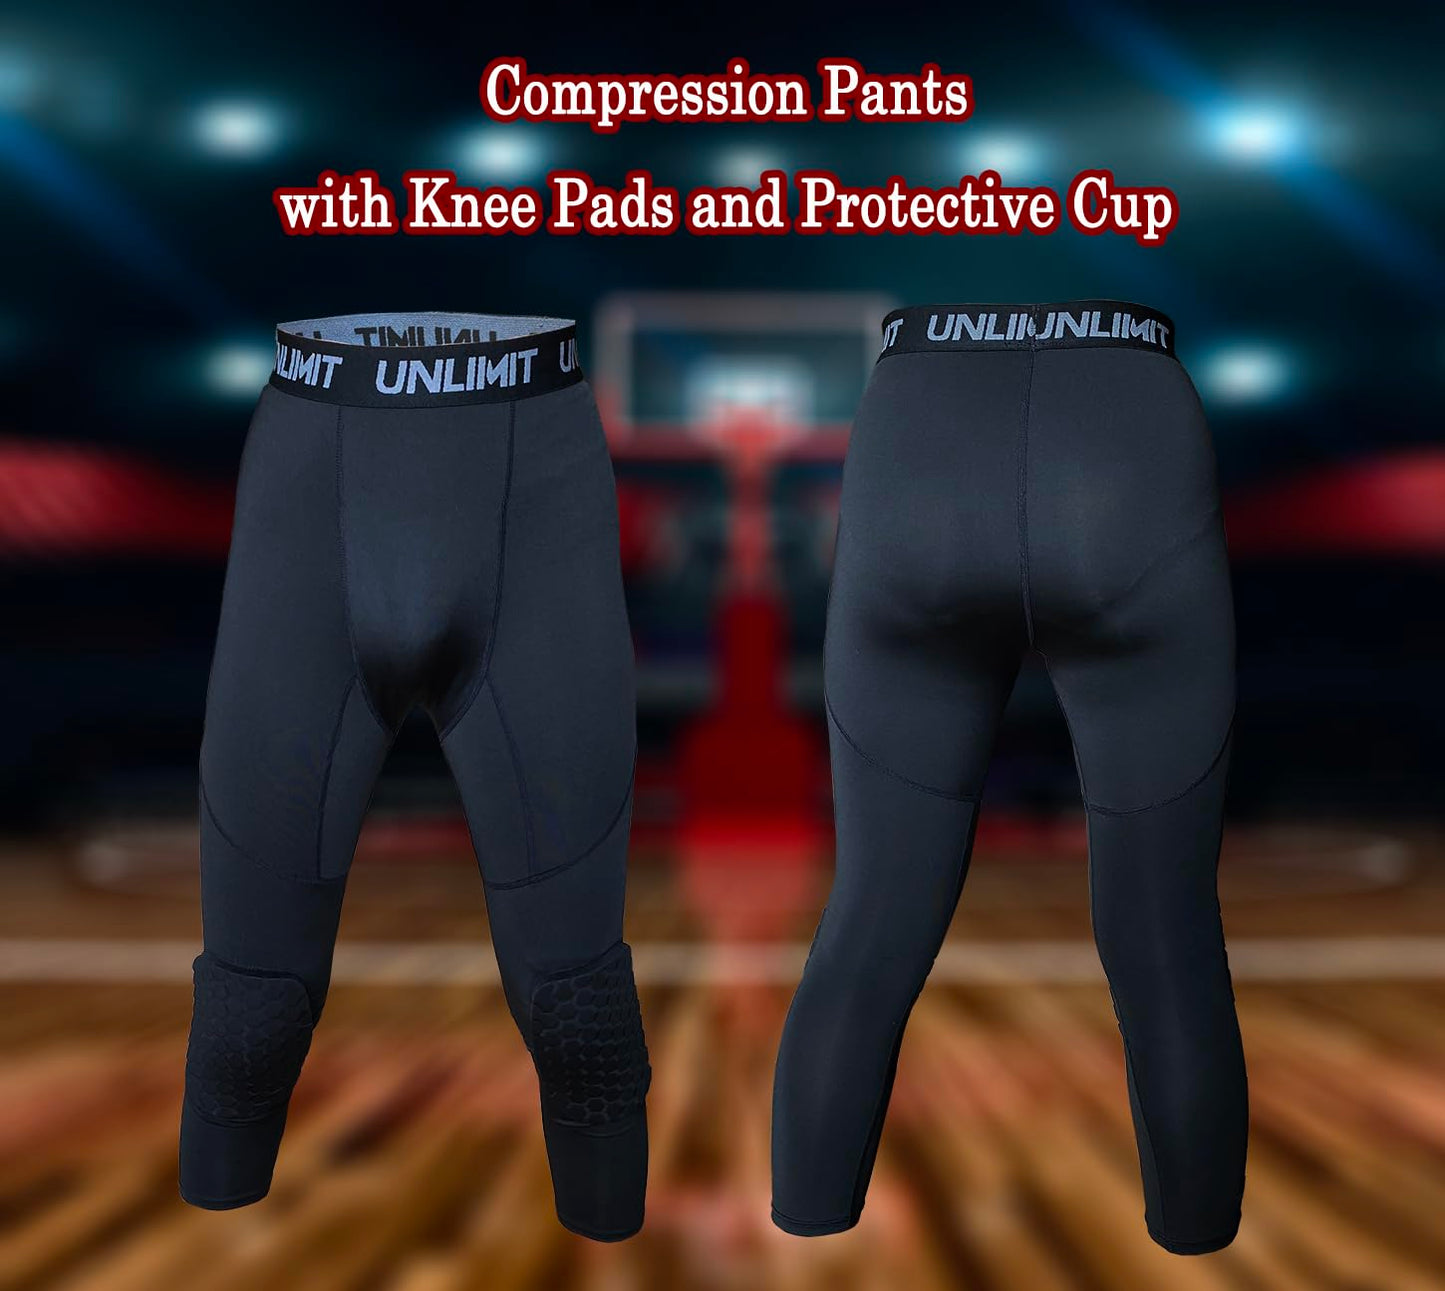 Compression Pants with Knee Pads and Protective Cup for Mens in Baseball Football Lacrosse MMA Basketball and Hockey, Black.